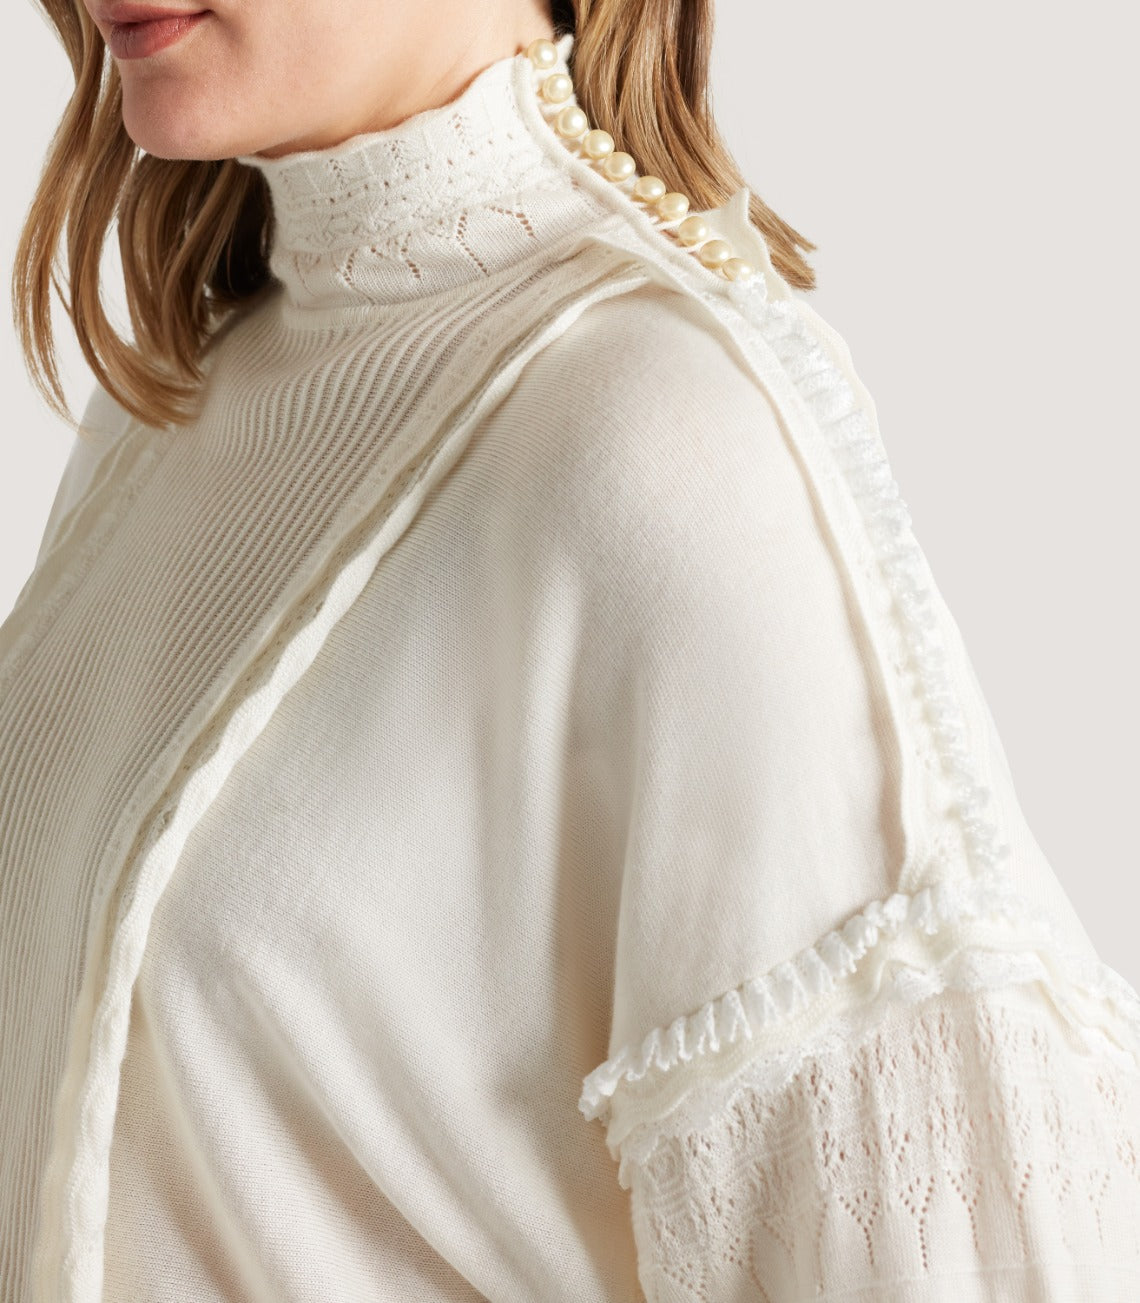 Women's Cashmere Sweater Blouse With Lace Trim In Ivory